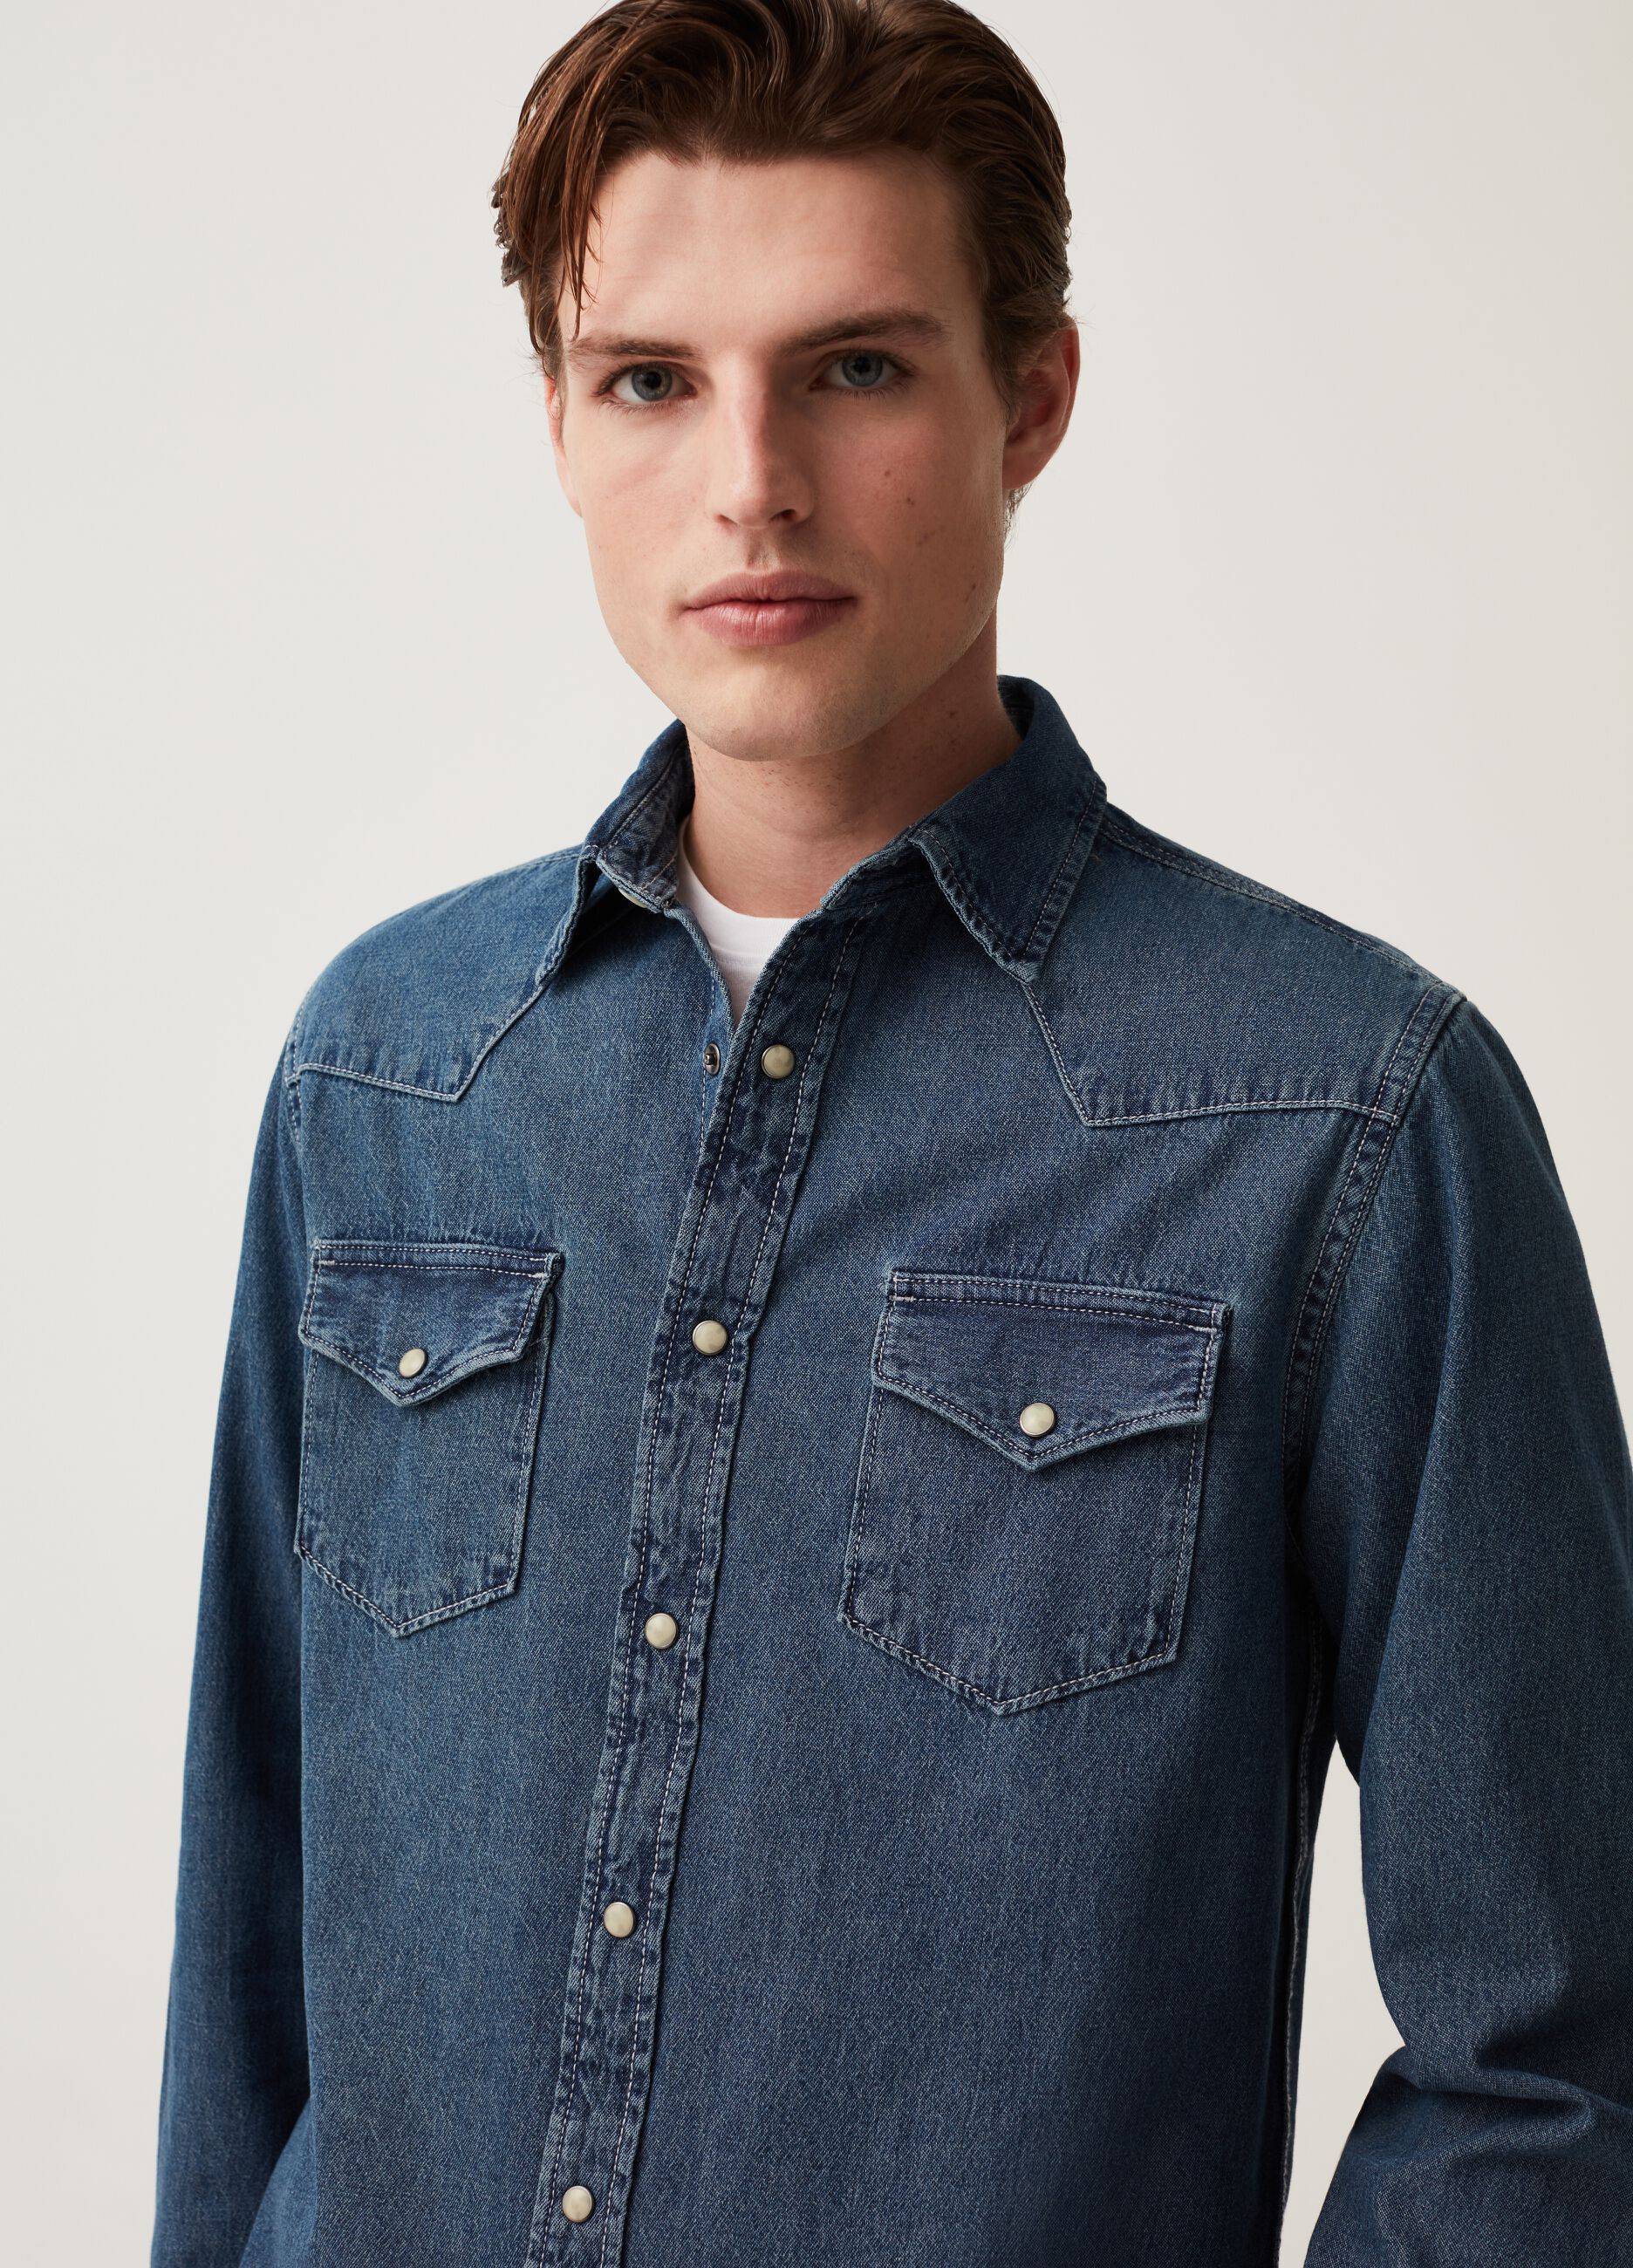 Grand & Hills denim shirt with pearl buttons